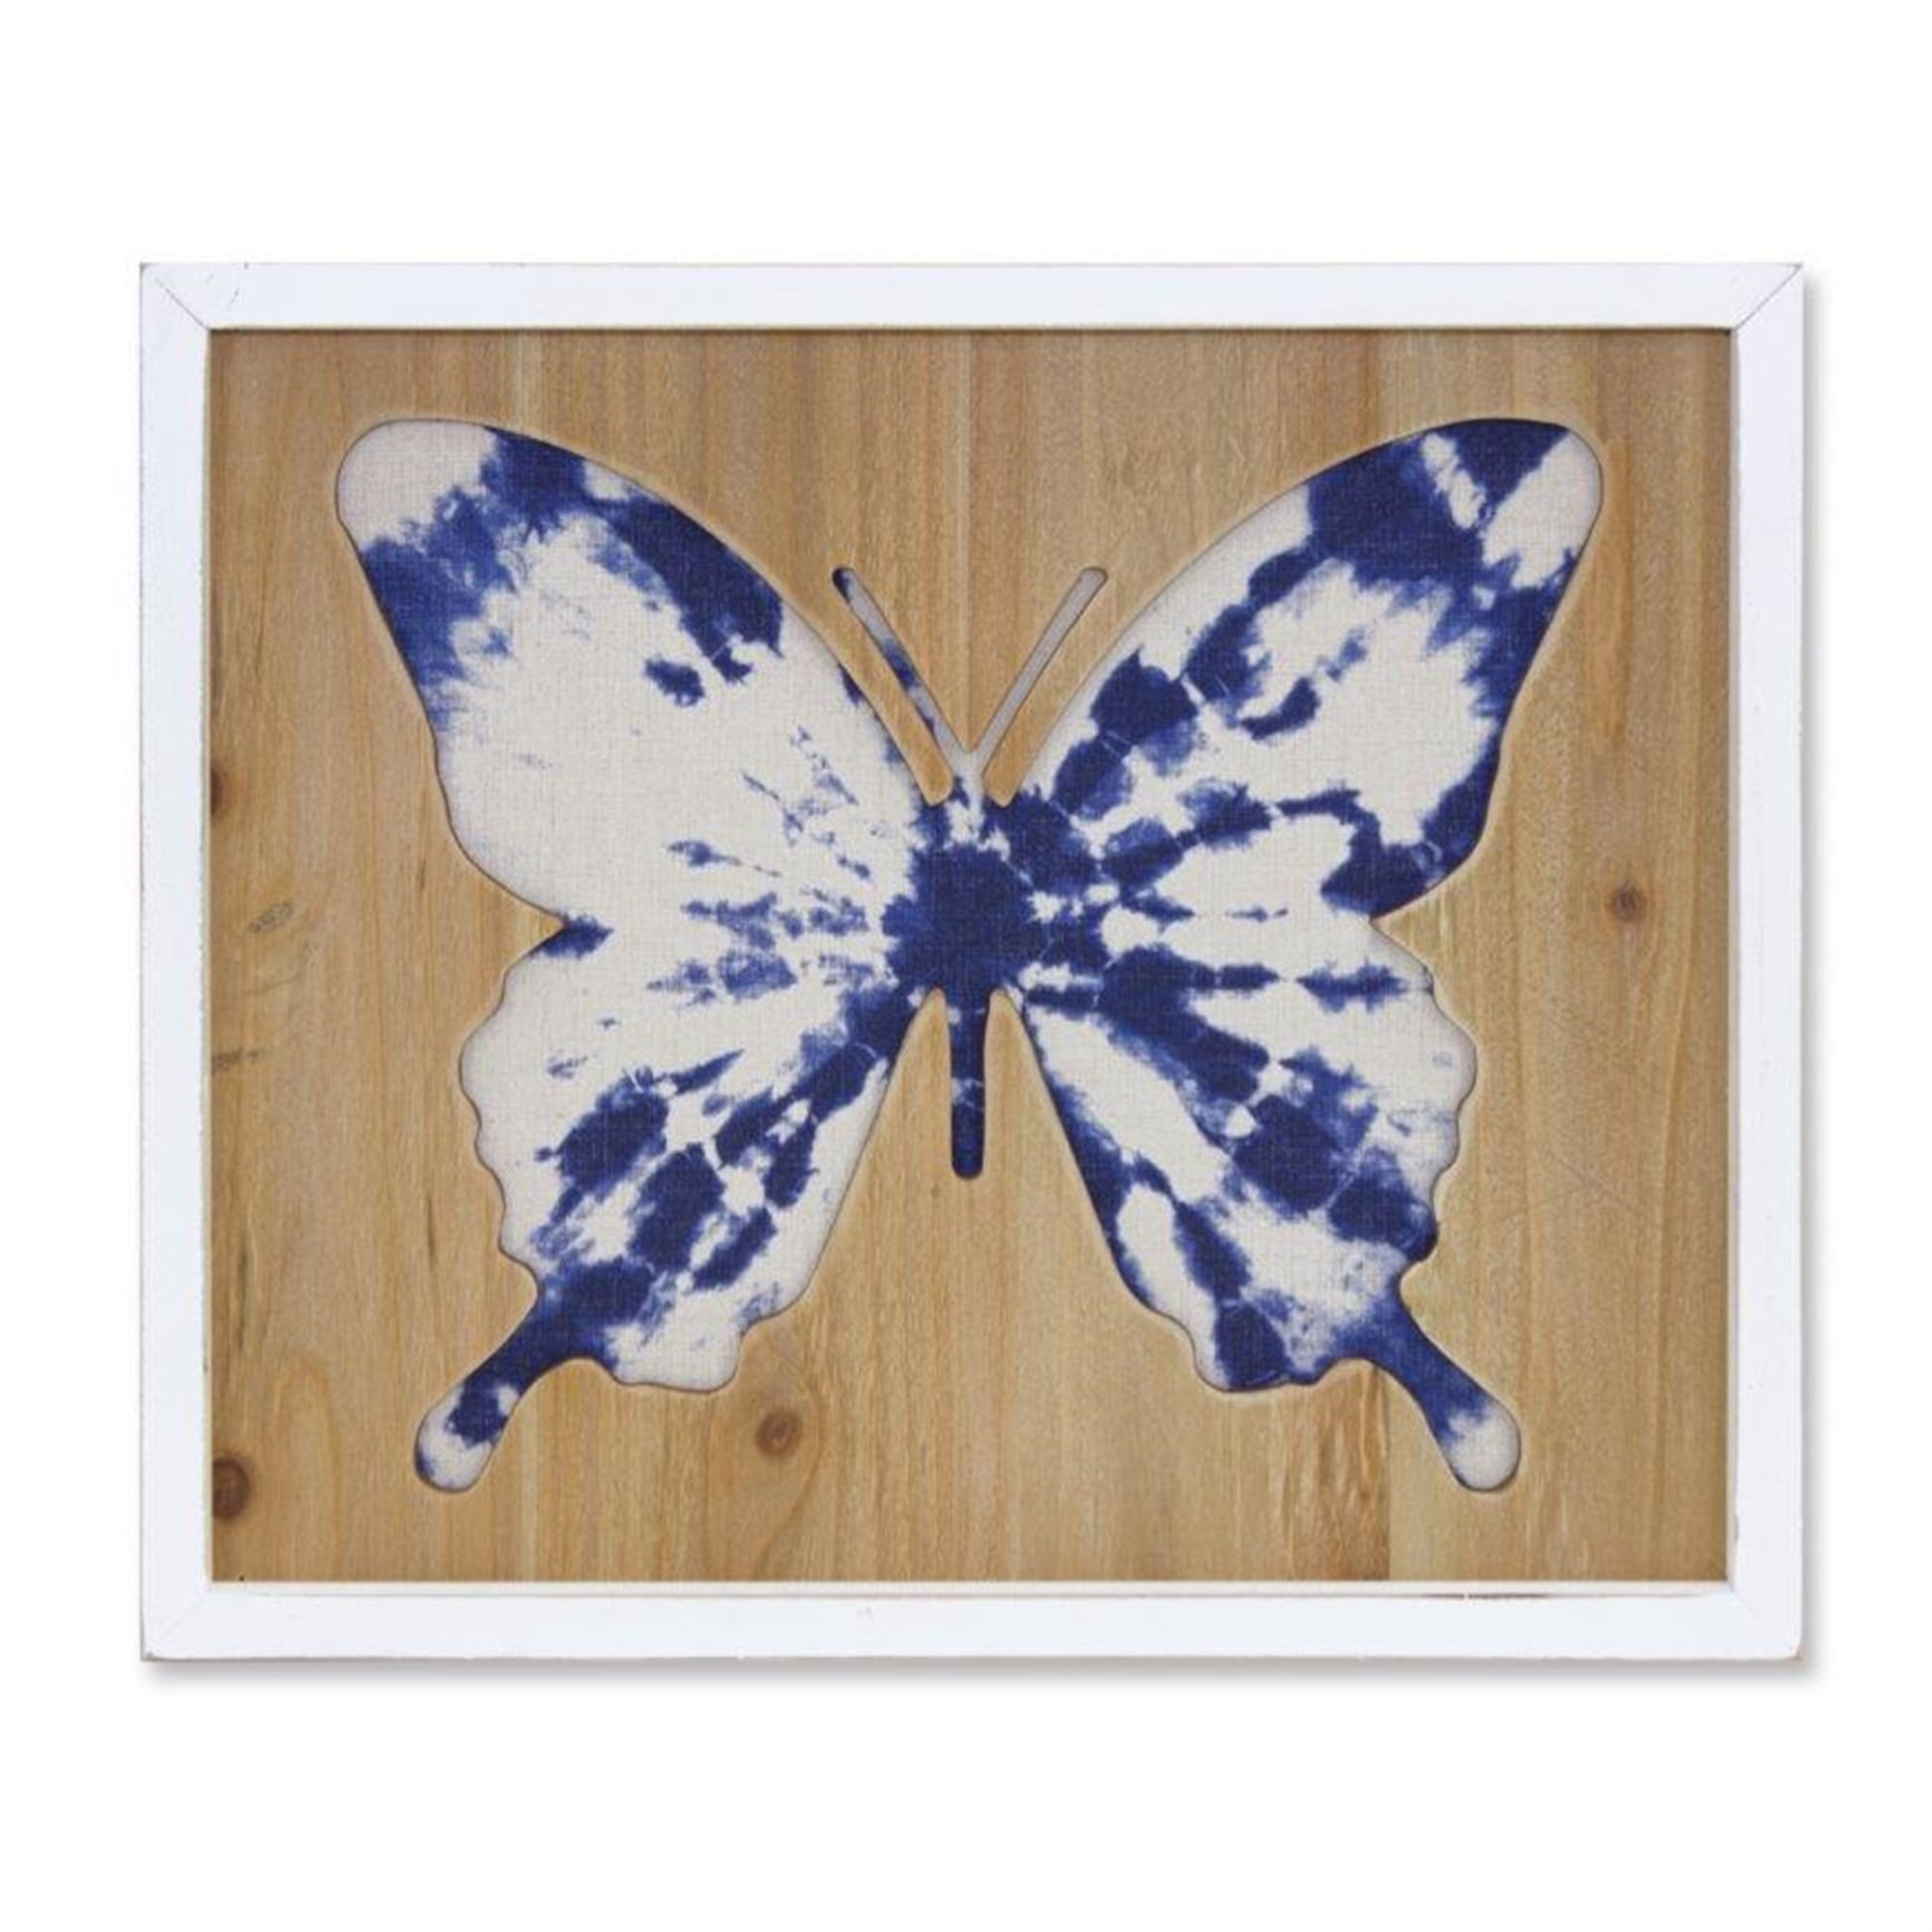 Butterfly Plaque 16.25"L x 14"H Wood/MDF